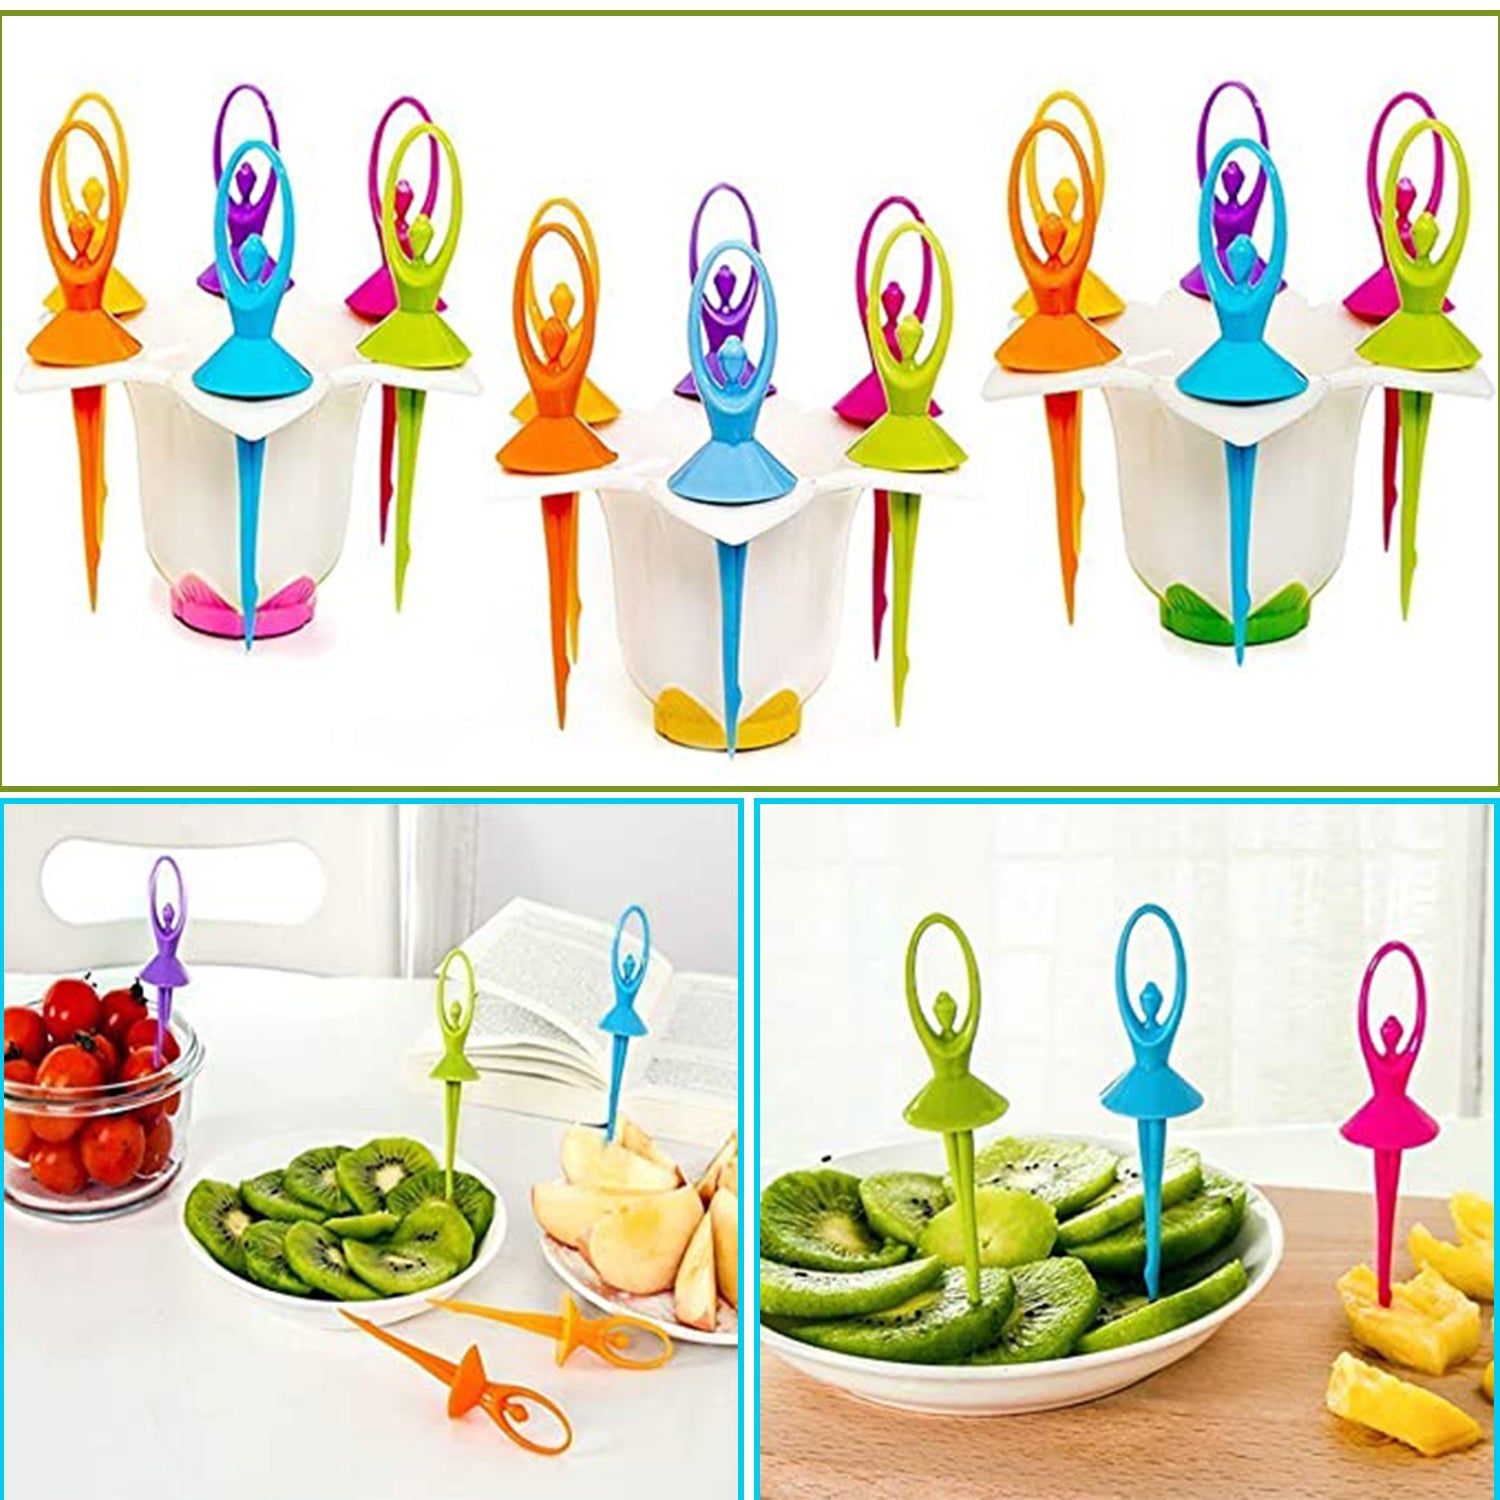 2046 Dancing Doll Fruit Fork Cutlery Set with Stand Set of 6 DeoDap